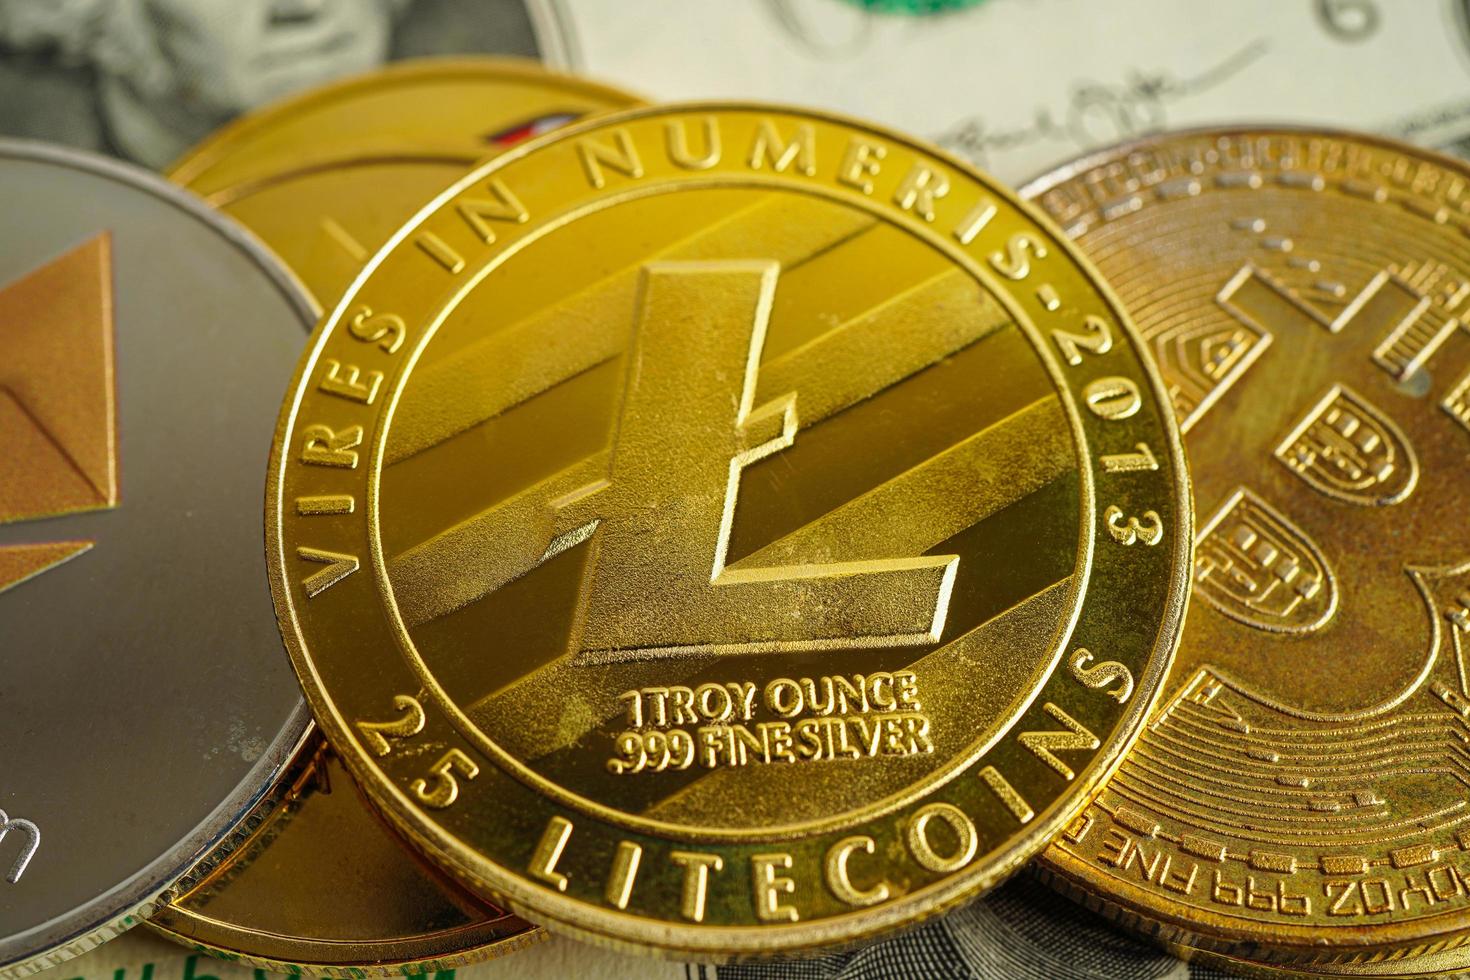 Litecoins for online business and commercial, Digital currency, Virtual cryptocurrency. photo